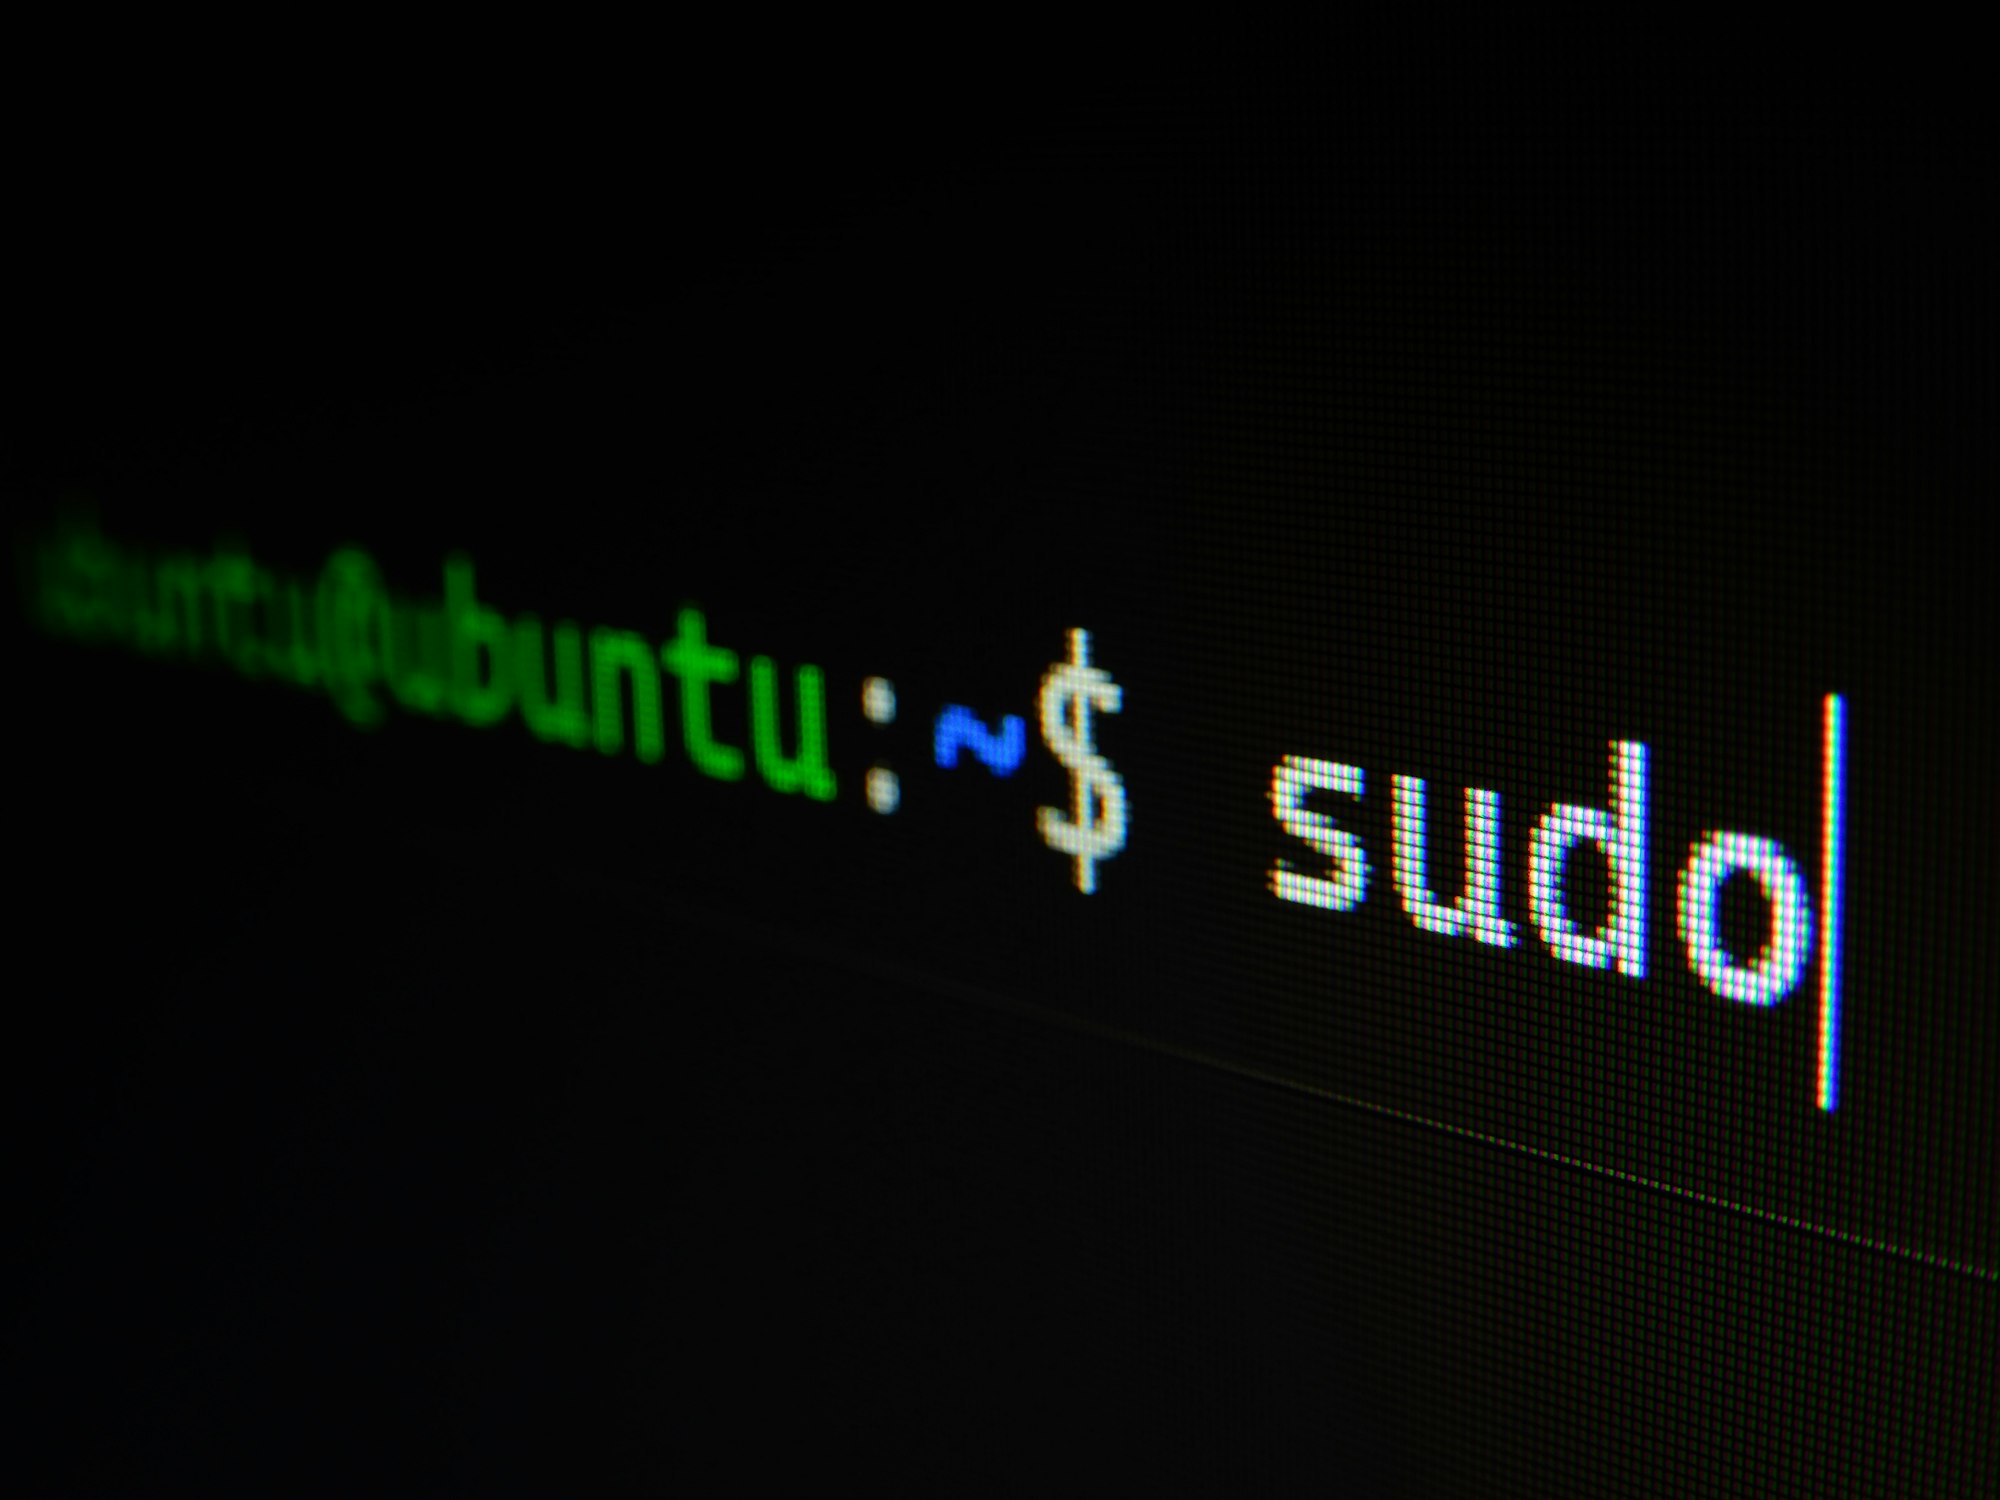 
"sudo" stands for "superuser do". With sudo, commands are executed with superuser privileges.

Linux (Ubuntu) bash terminal in Windows subsystem for Linux (WSL).